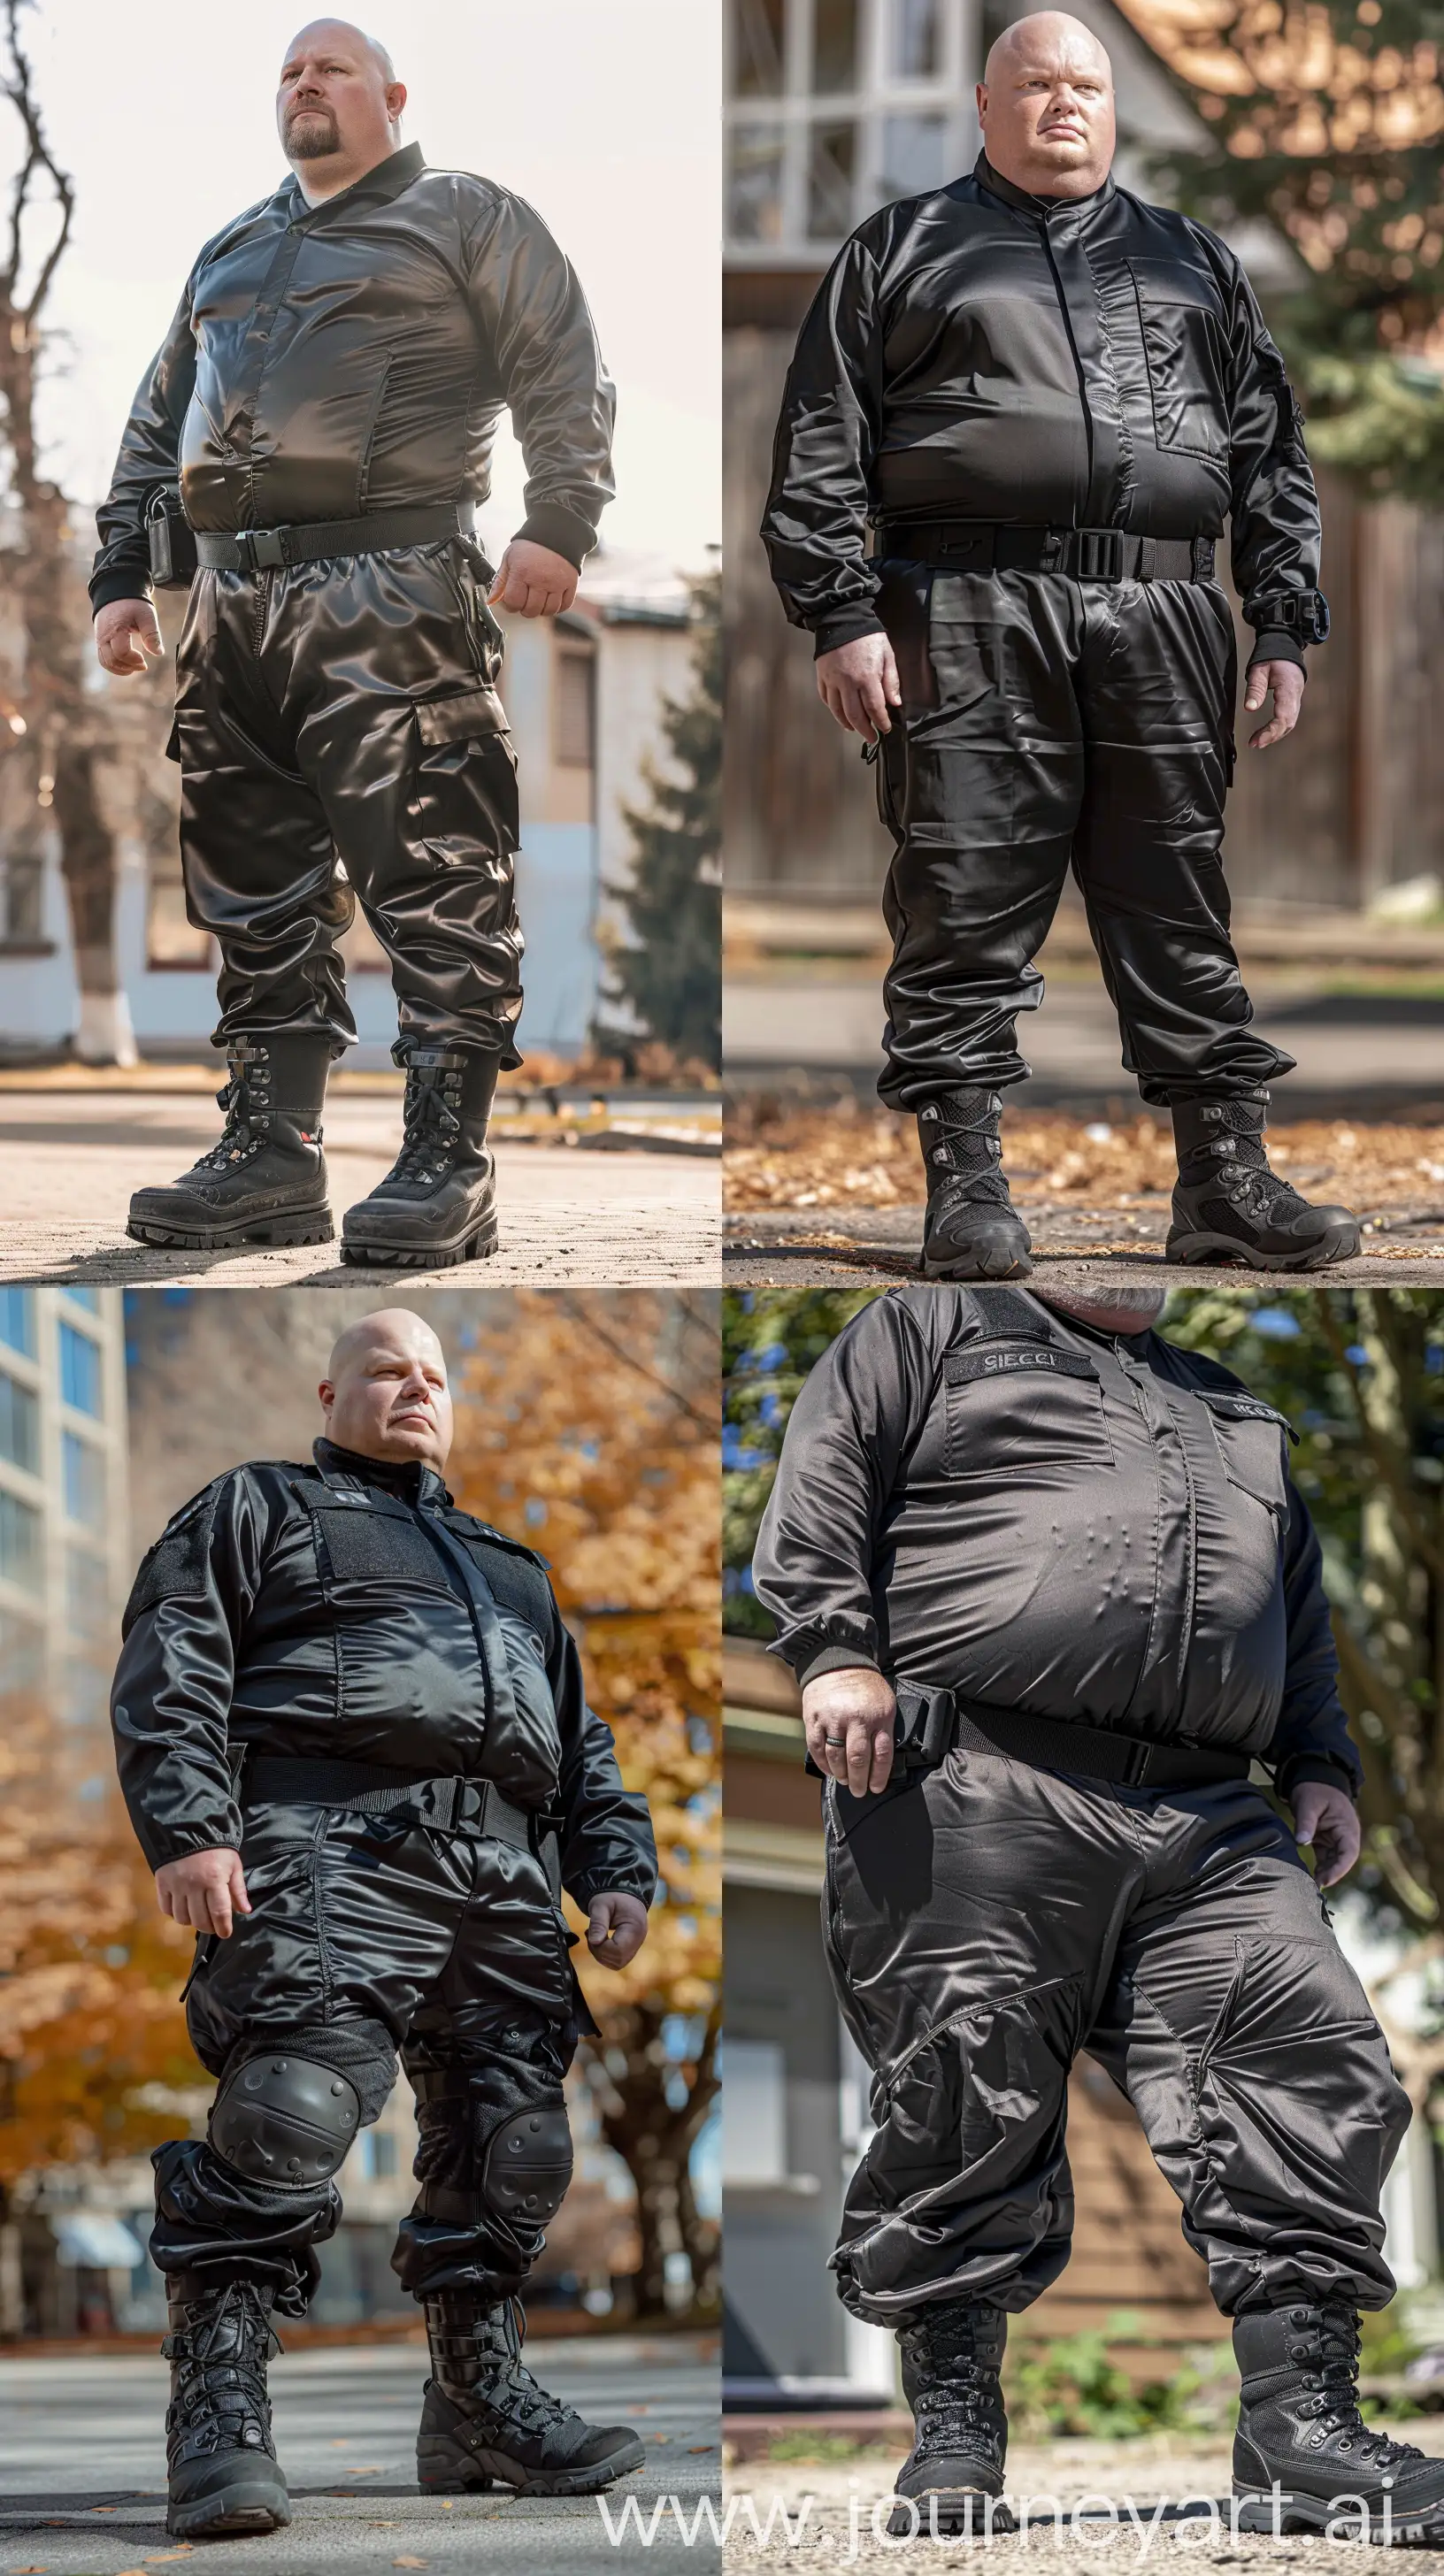 Bald-Security-Guard-in-Tactical-Black-Skinny-Coverall-Standing-Vigil-Outside